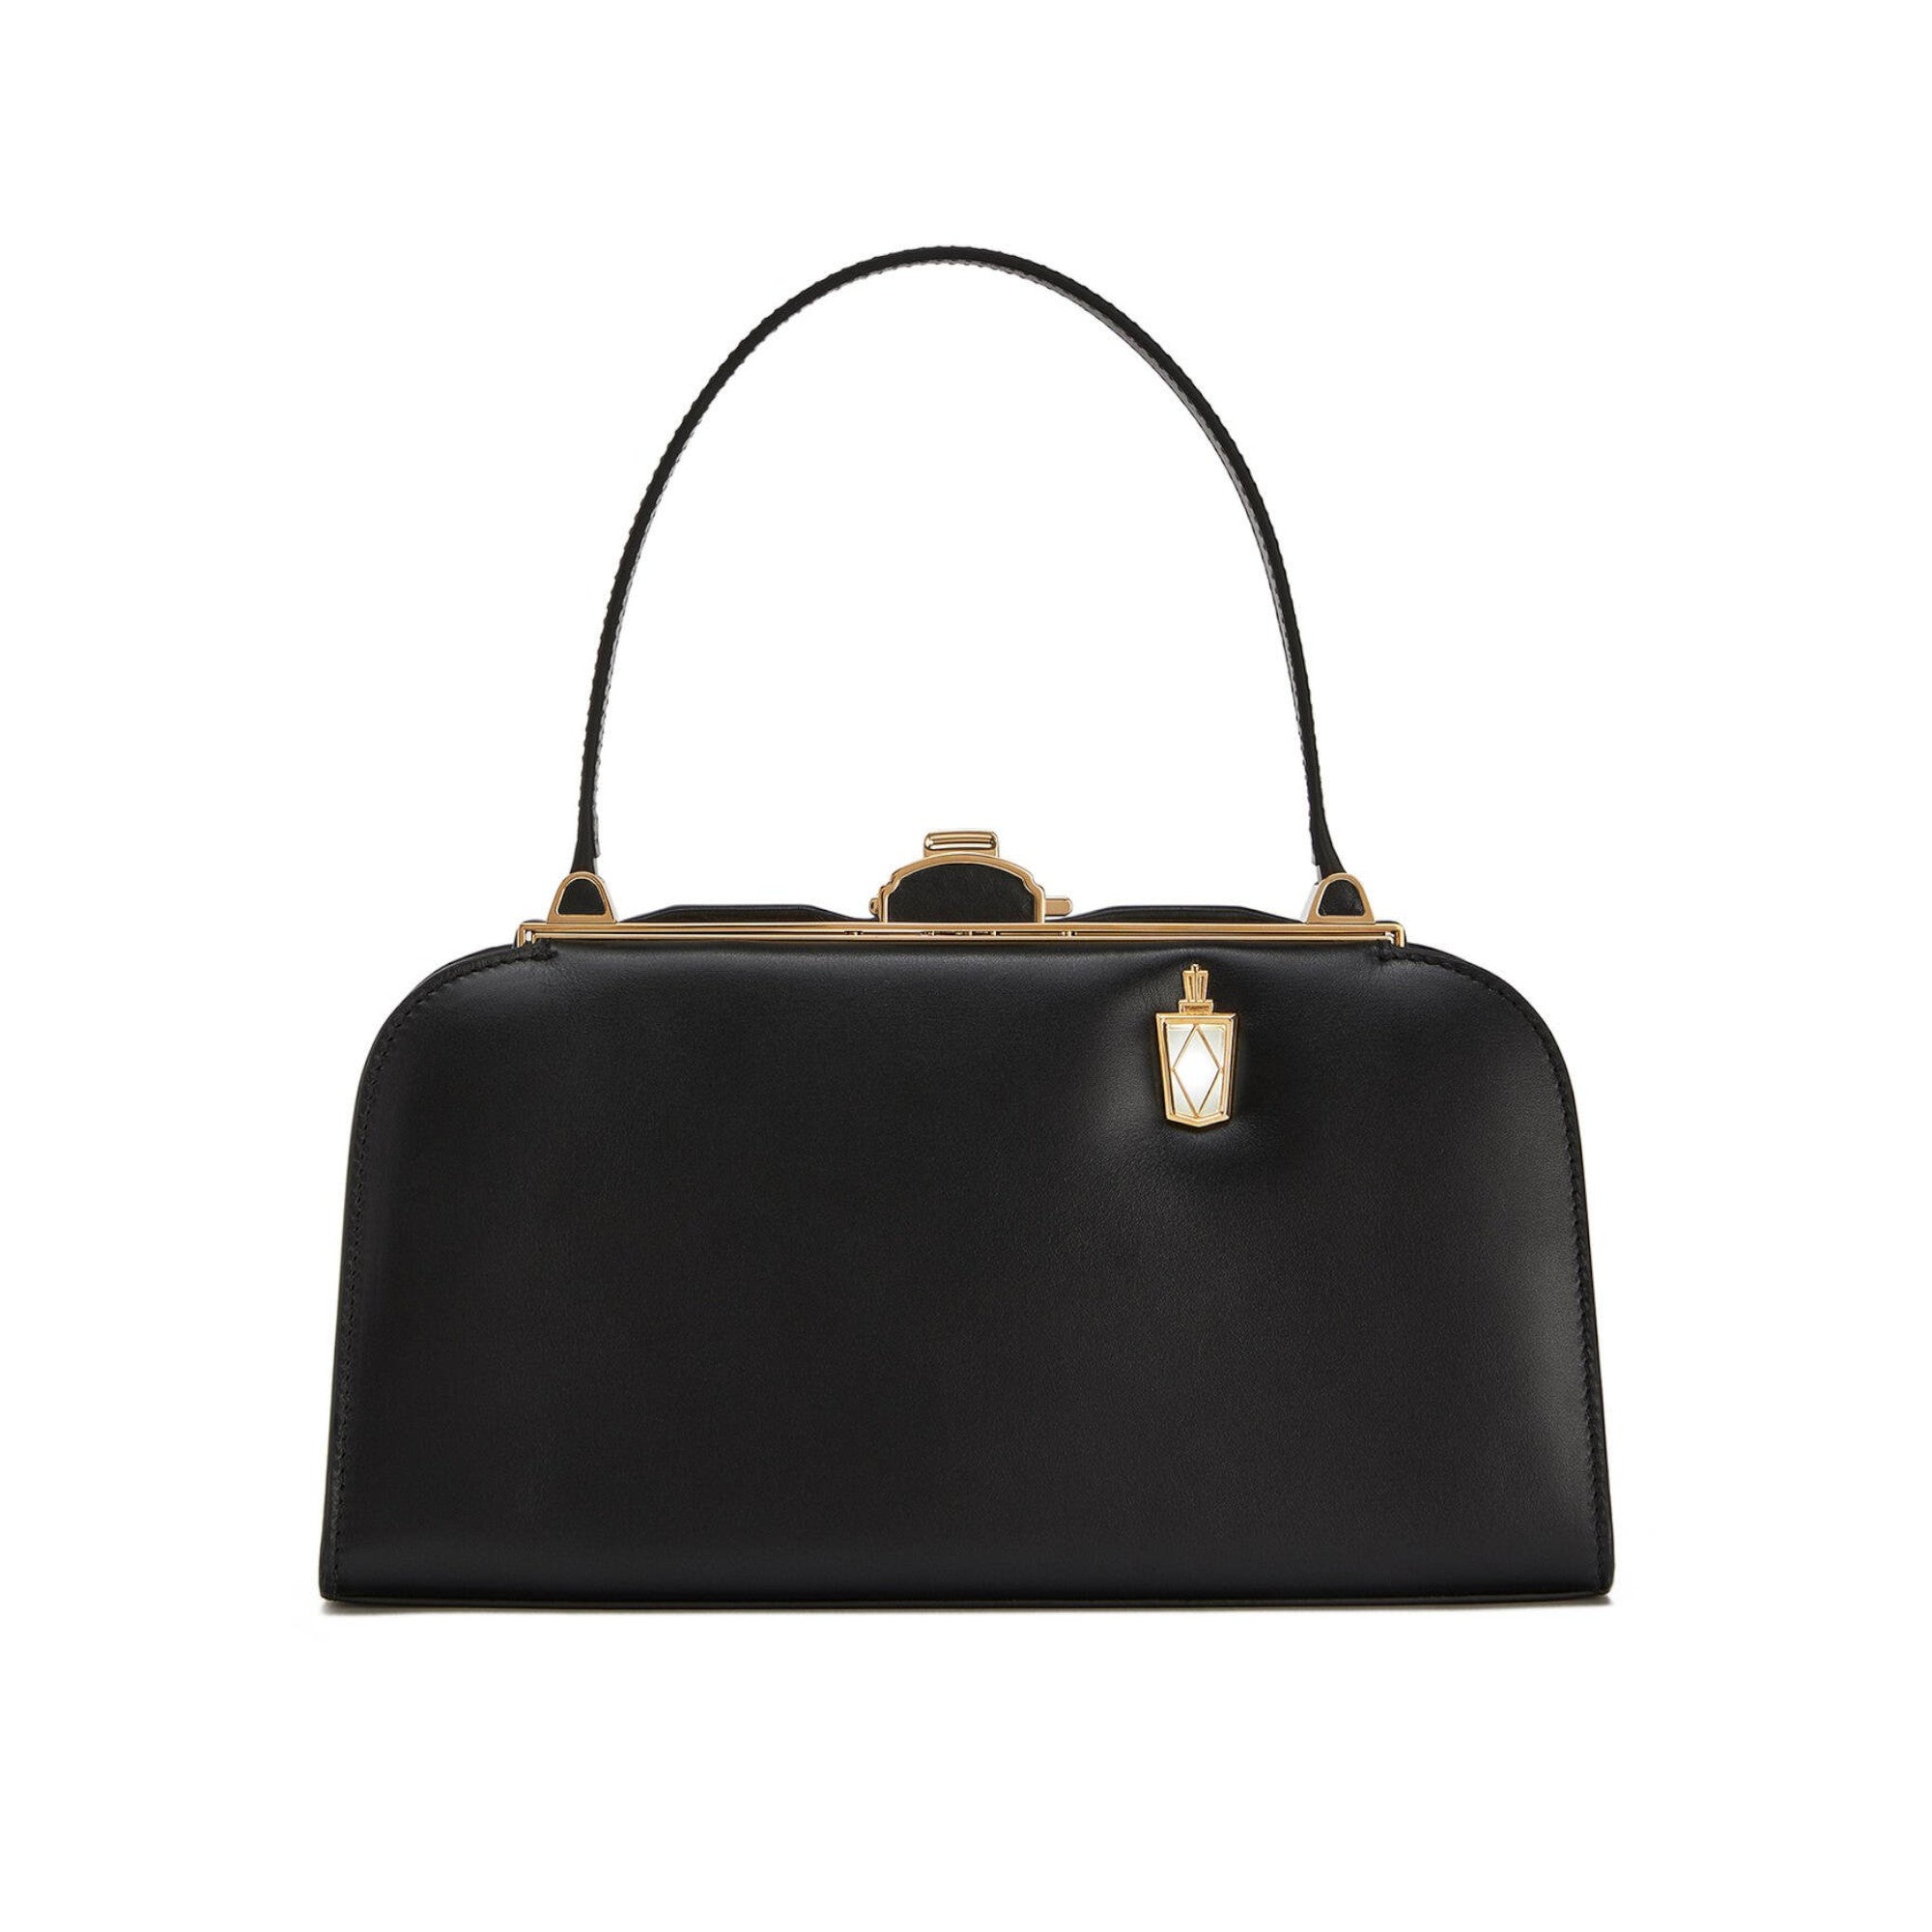 The Elegant and Versatile Appeal of the Loewe Gate Bag – LuxUness